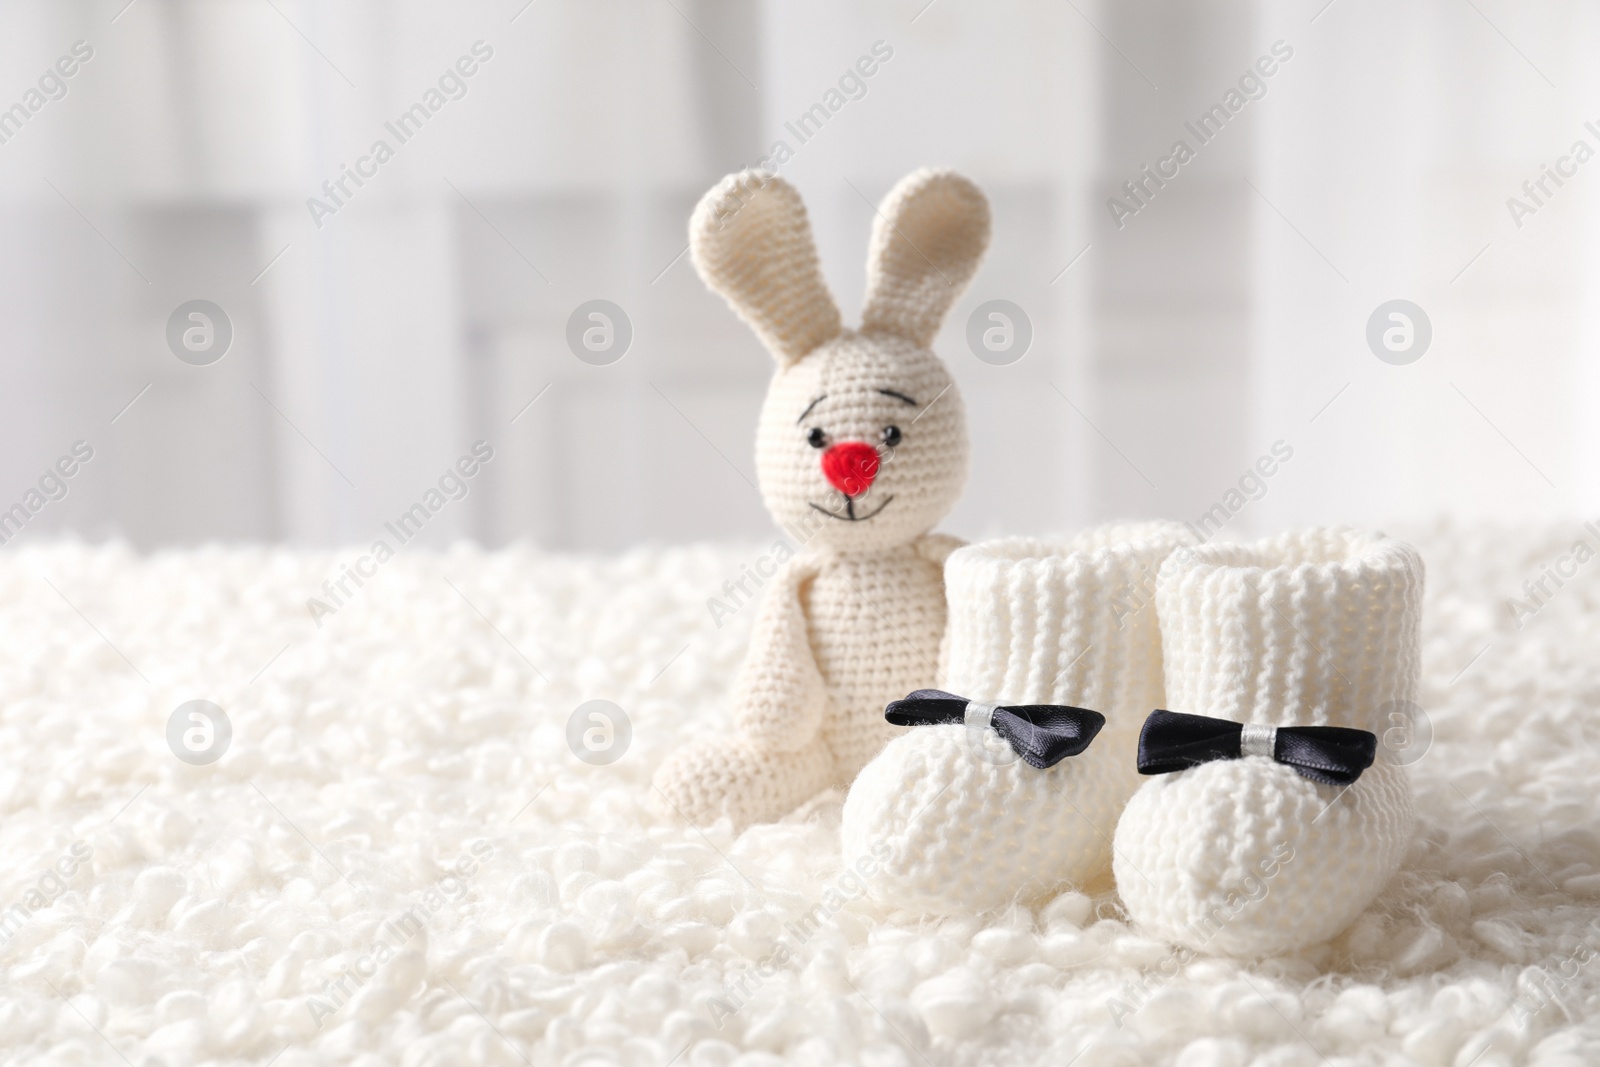 Photo of Handmade baby booties and stuffed rabbit on plaid against blurred background. Space for text